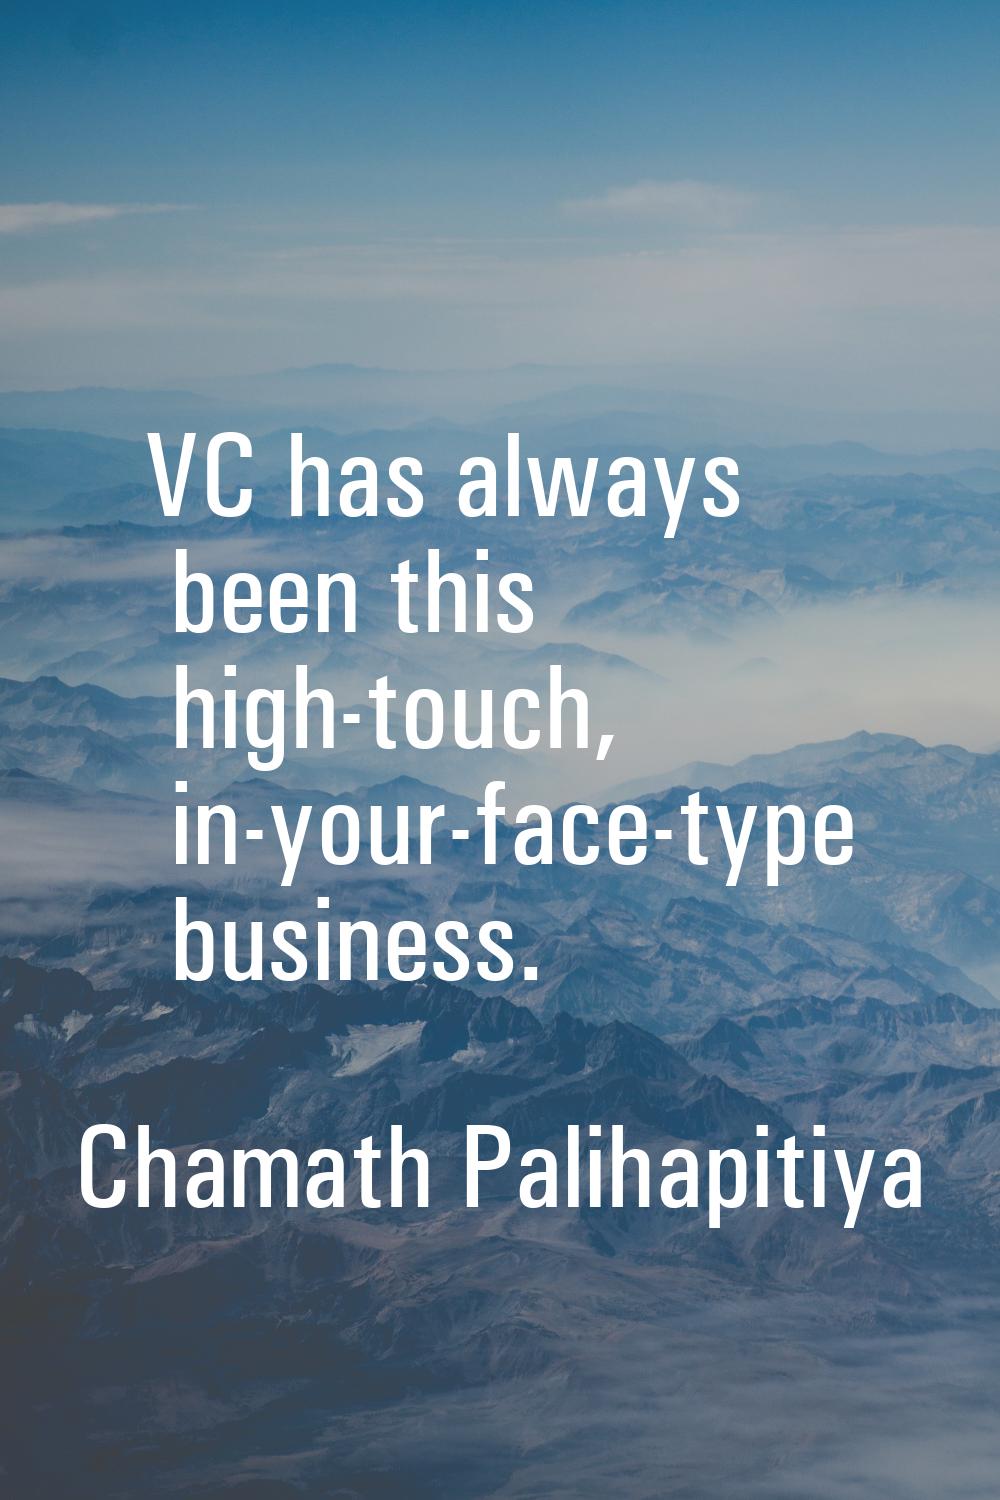 VC has always been this high-touch, in-your-face-type business.